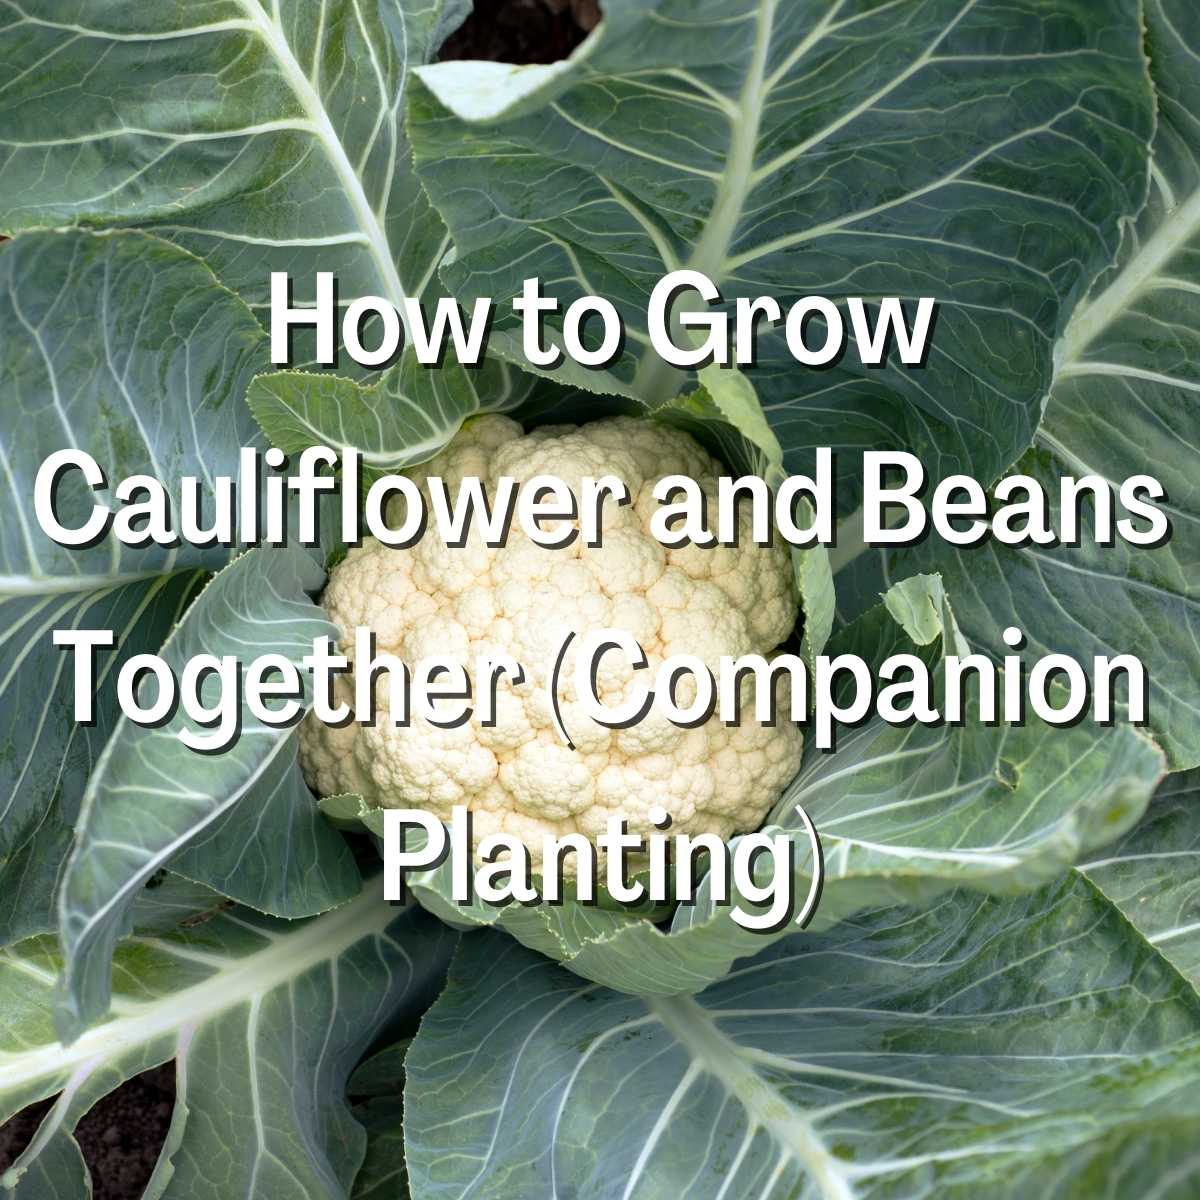 How to Grow Cauliflower and Beans Together